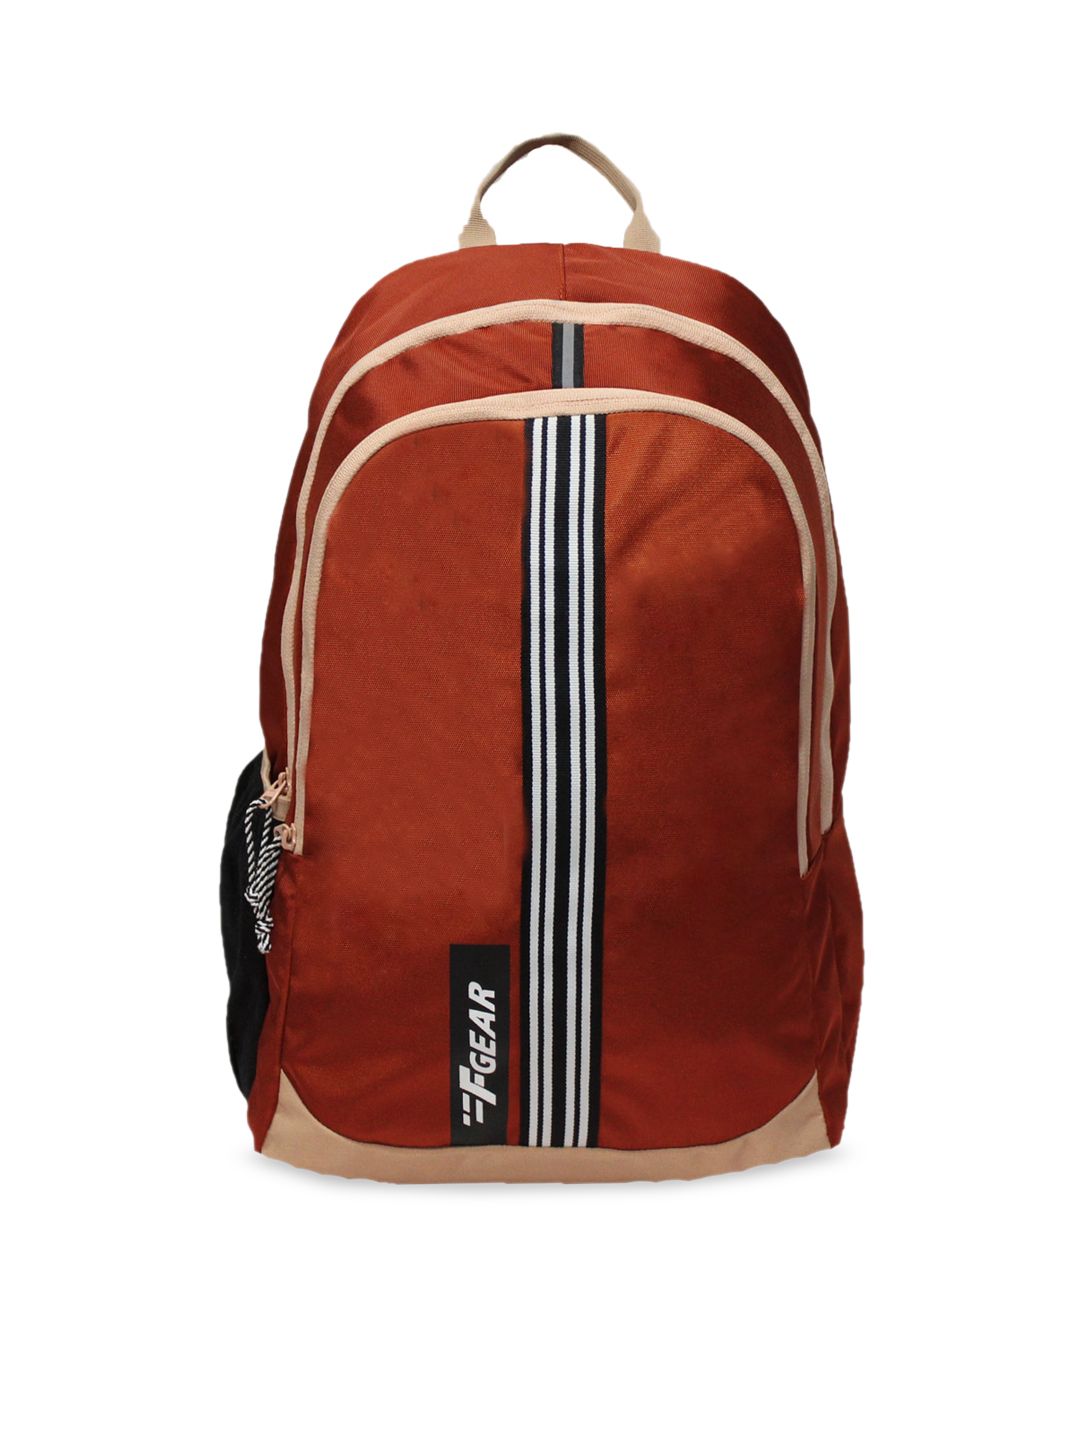 F Gear Unisex Brown Contrast Detail Backpack Price in India